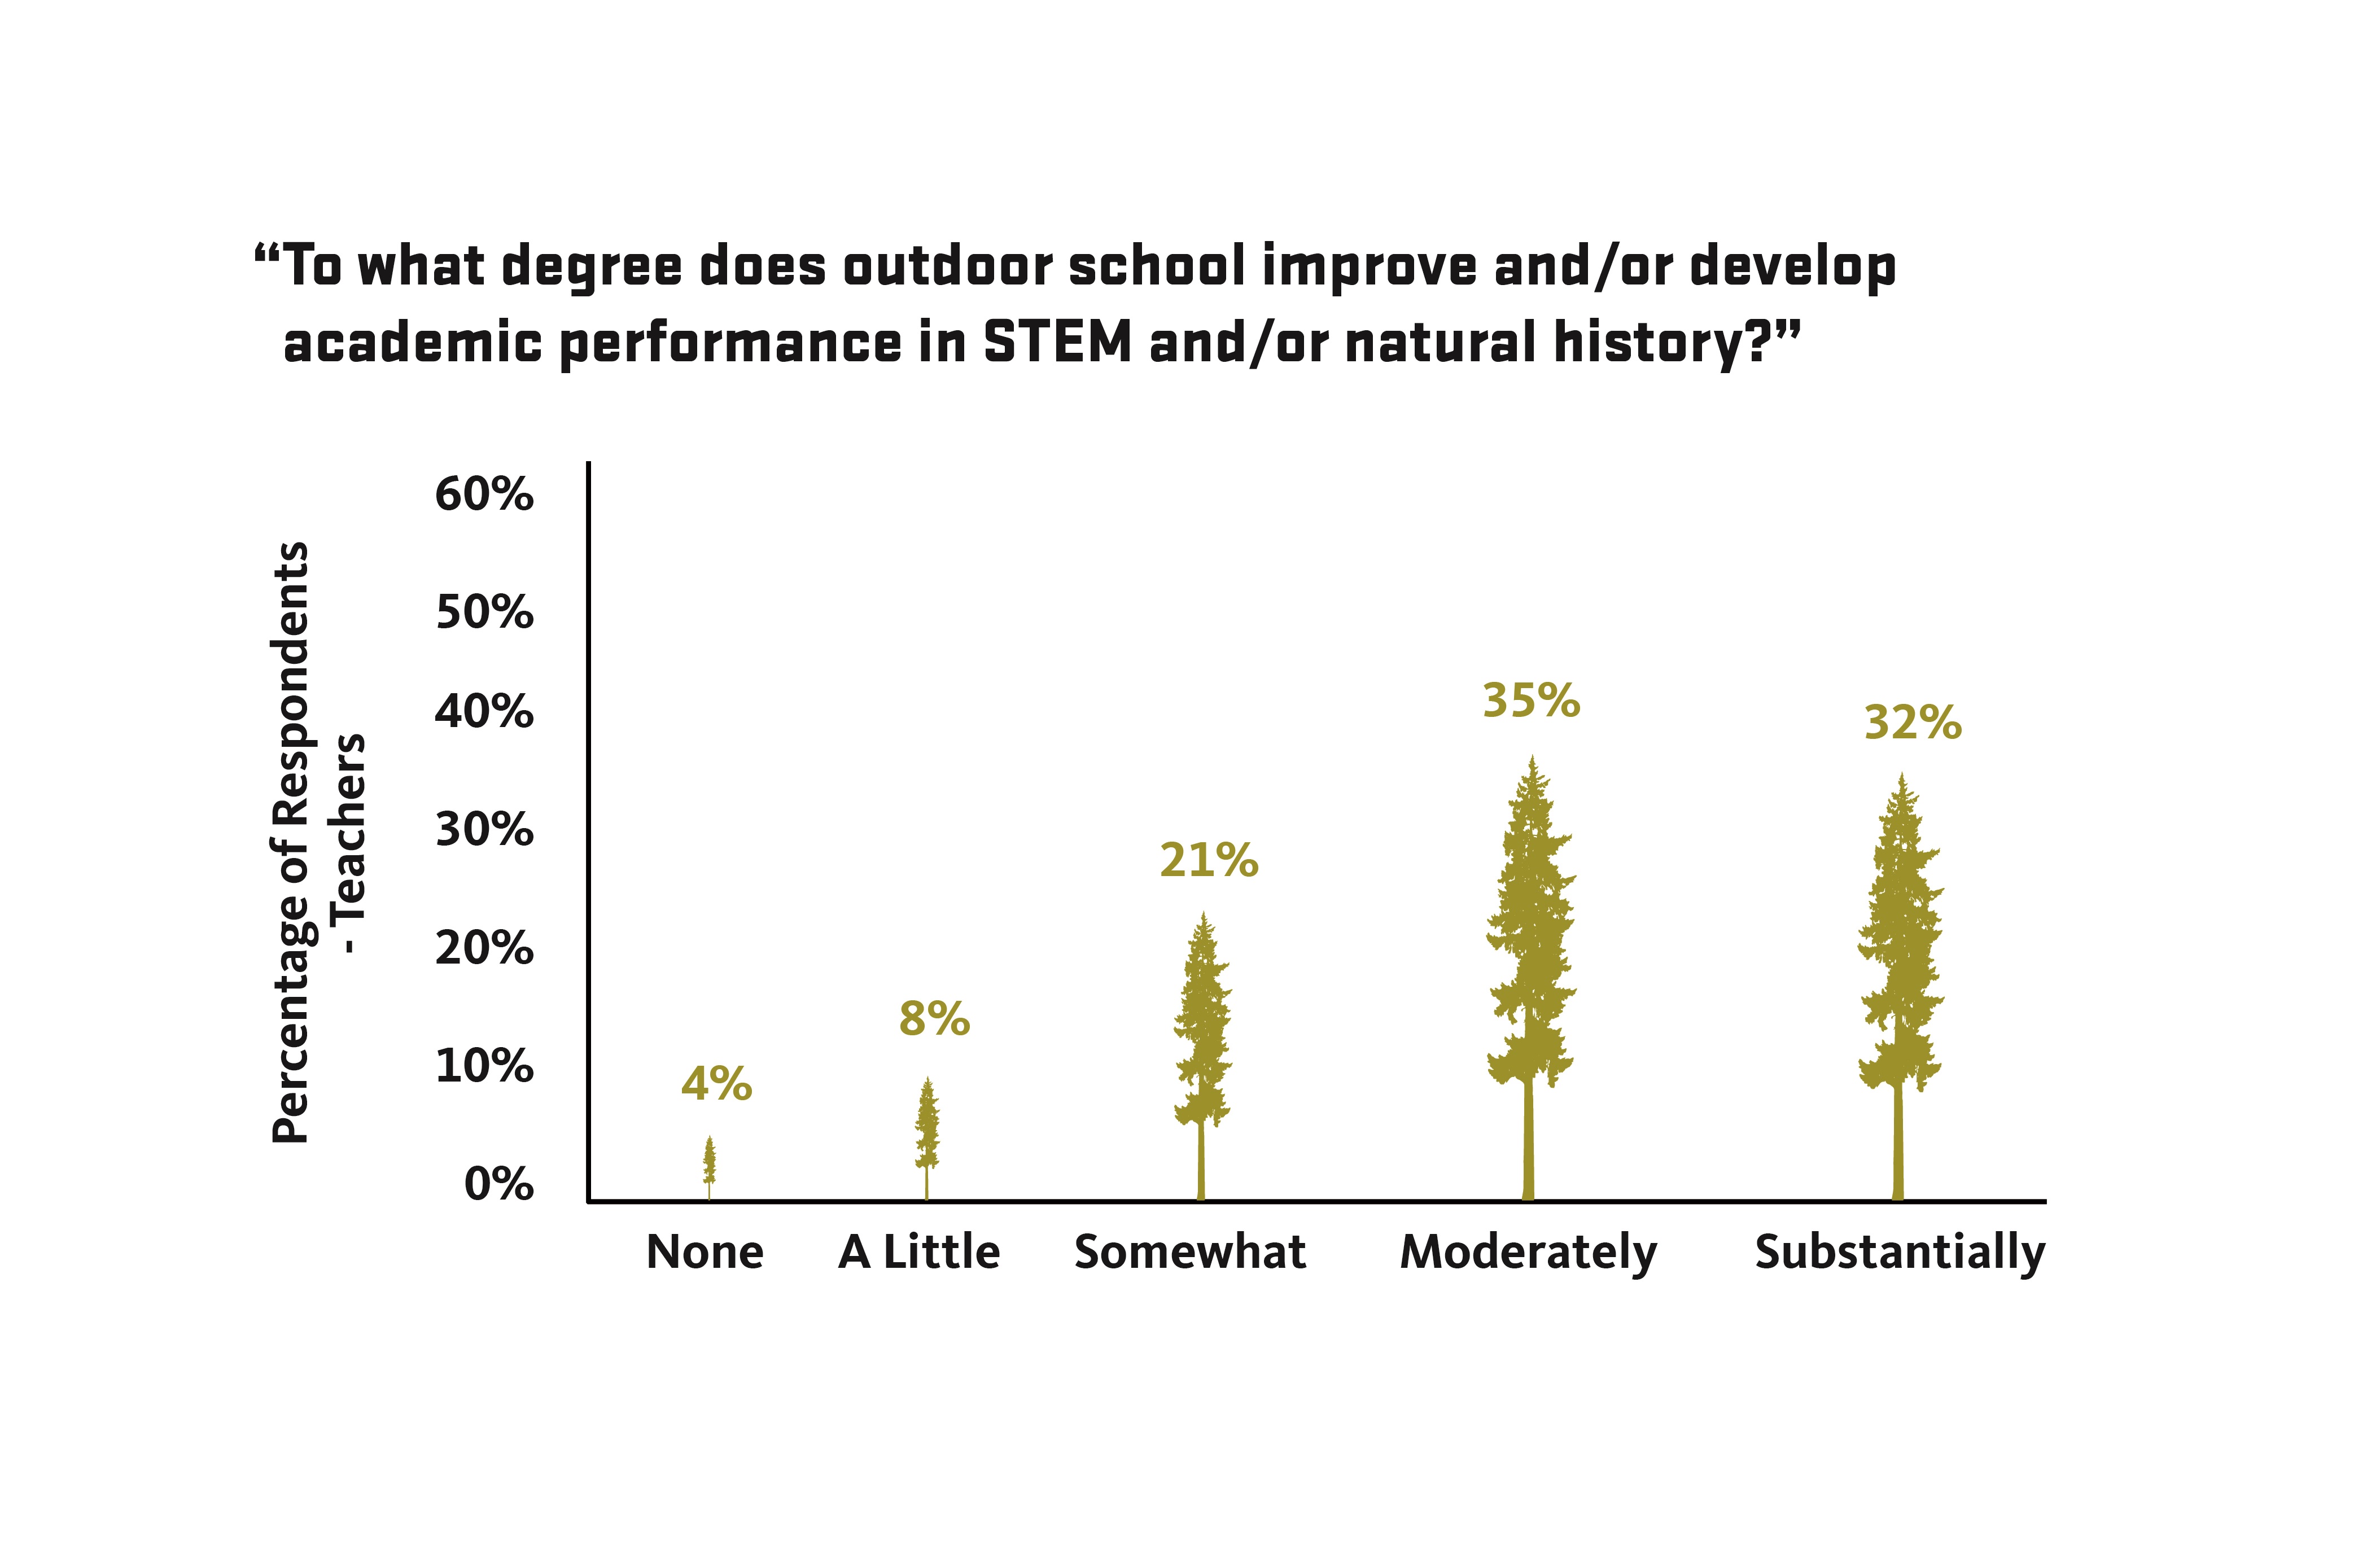 Graph showing improved student academic performance in STEM and/or natural history due to ODS